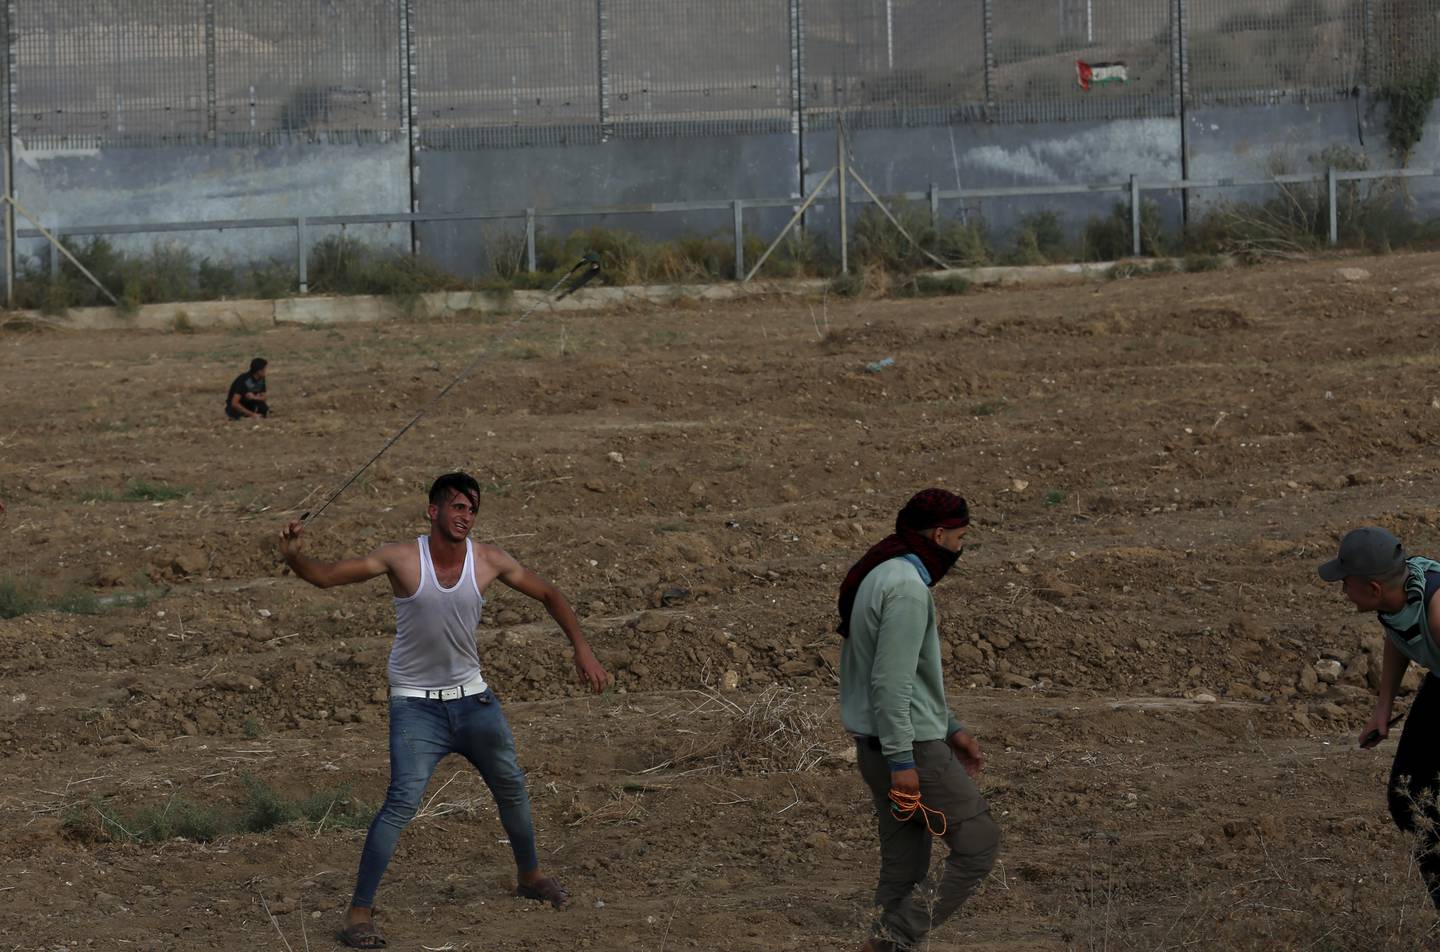 Men hurl stones at Israeli troops near the border fence between the Gaza Strip and Israel during a protest marking the anniversary of a 1969 arson attack at Al Aqsa Mosque in Jerusalem. AP